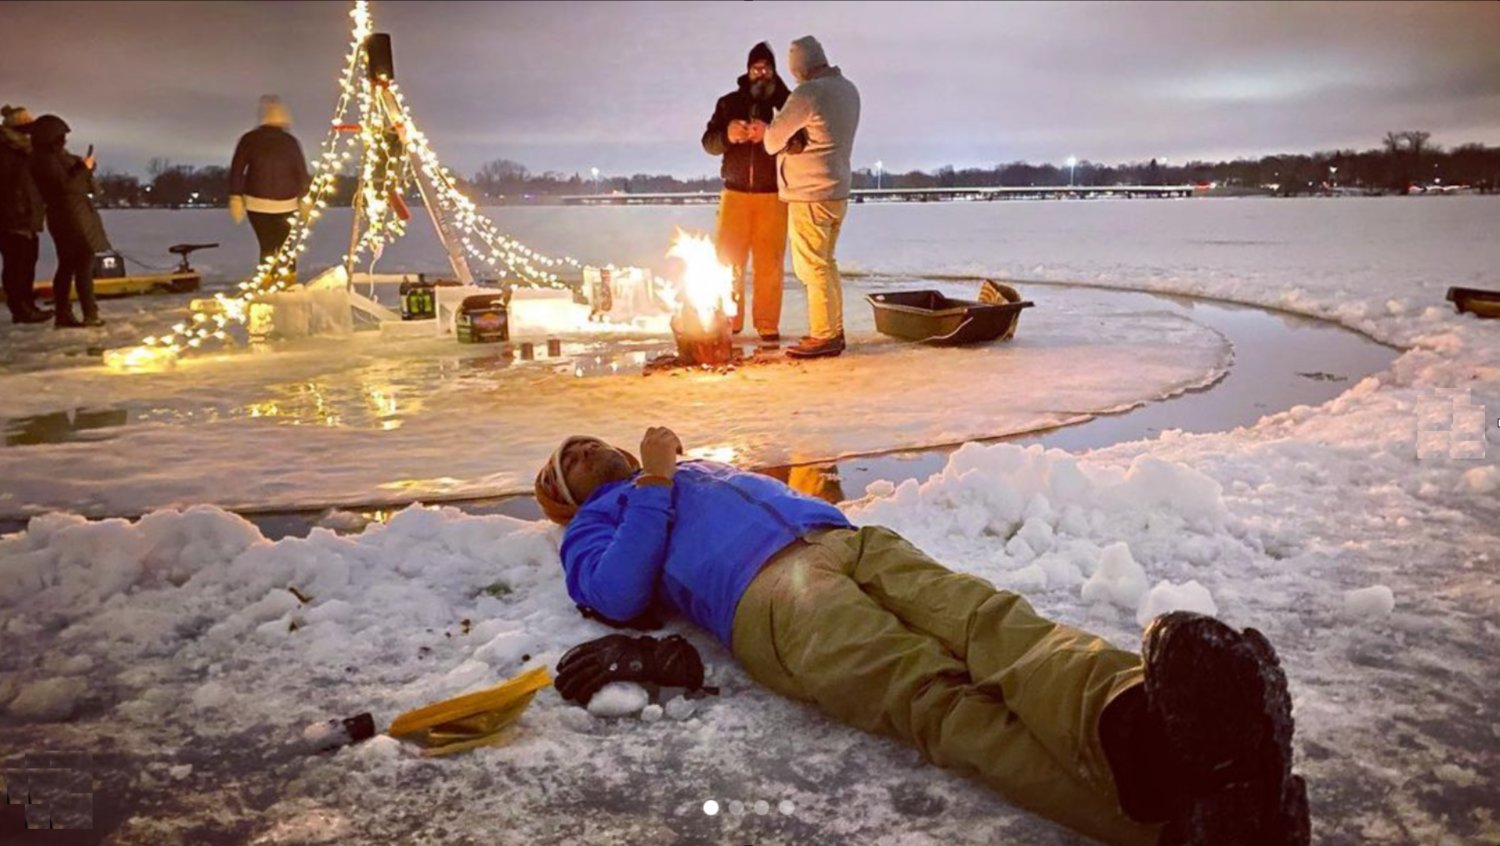 The ice carousel on Lake Nokomis brought the community together outside. "It's a small gesture, but from my vantage point, it had a big impact on the local community," said Ben Younan, who designed it. (Photo by Mimi Schirber)